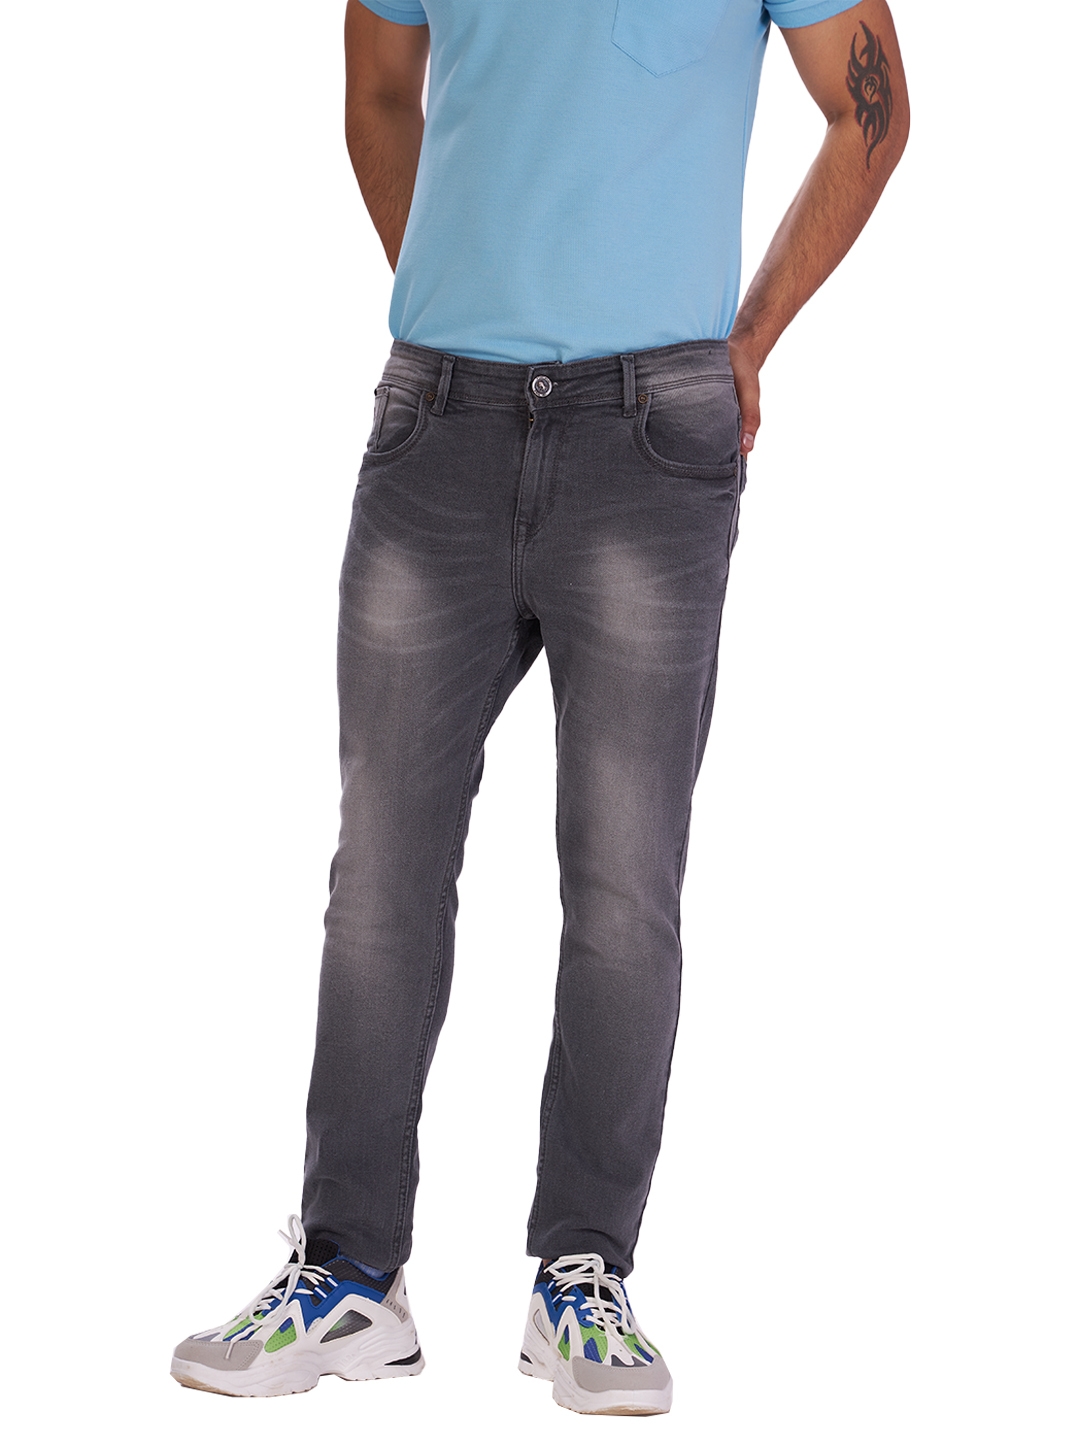 D'cot by Donear | D'cot by Donear Men's Grey Cotton Jeans